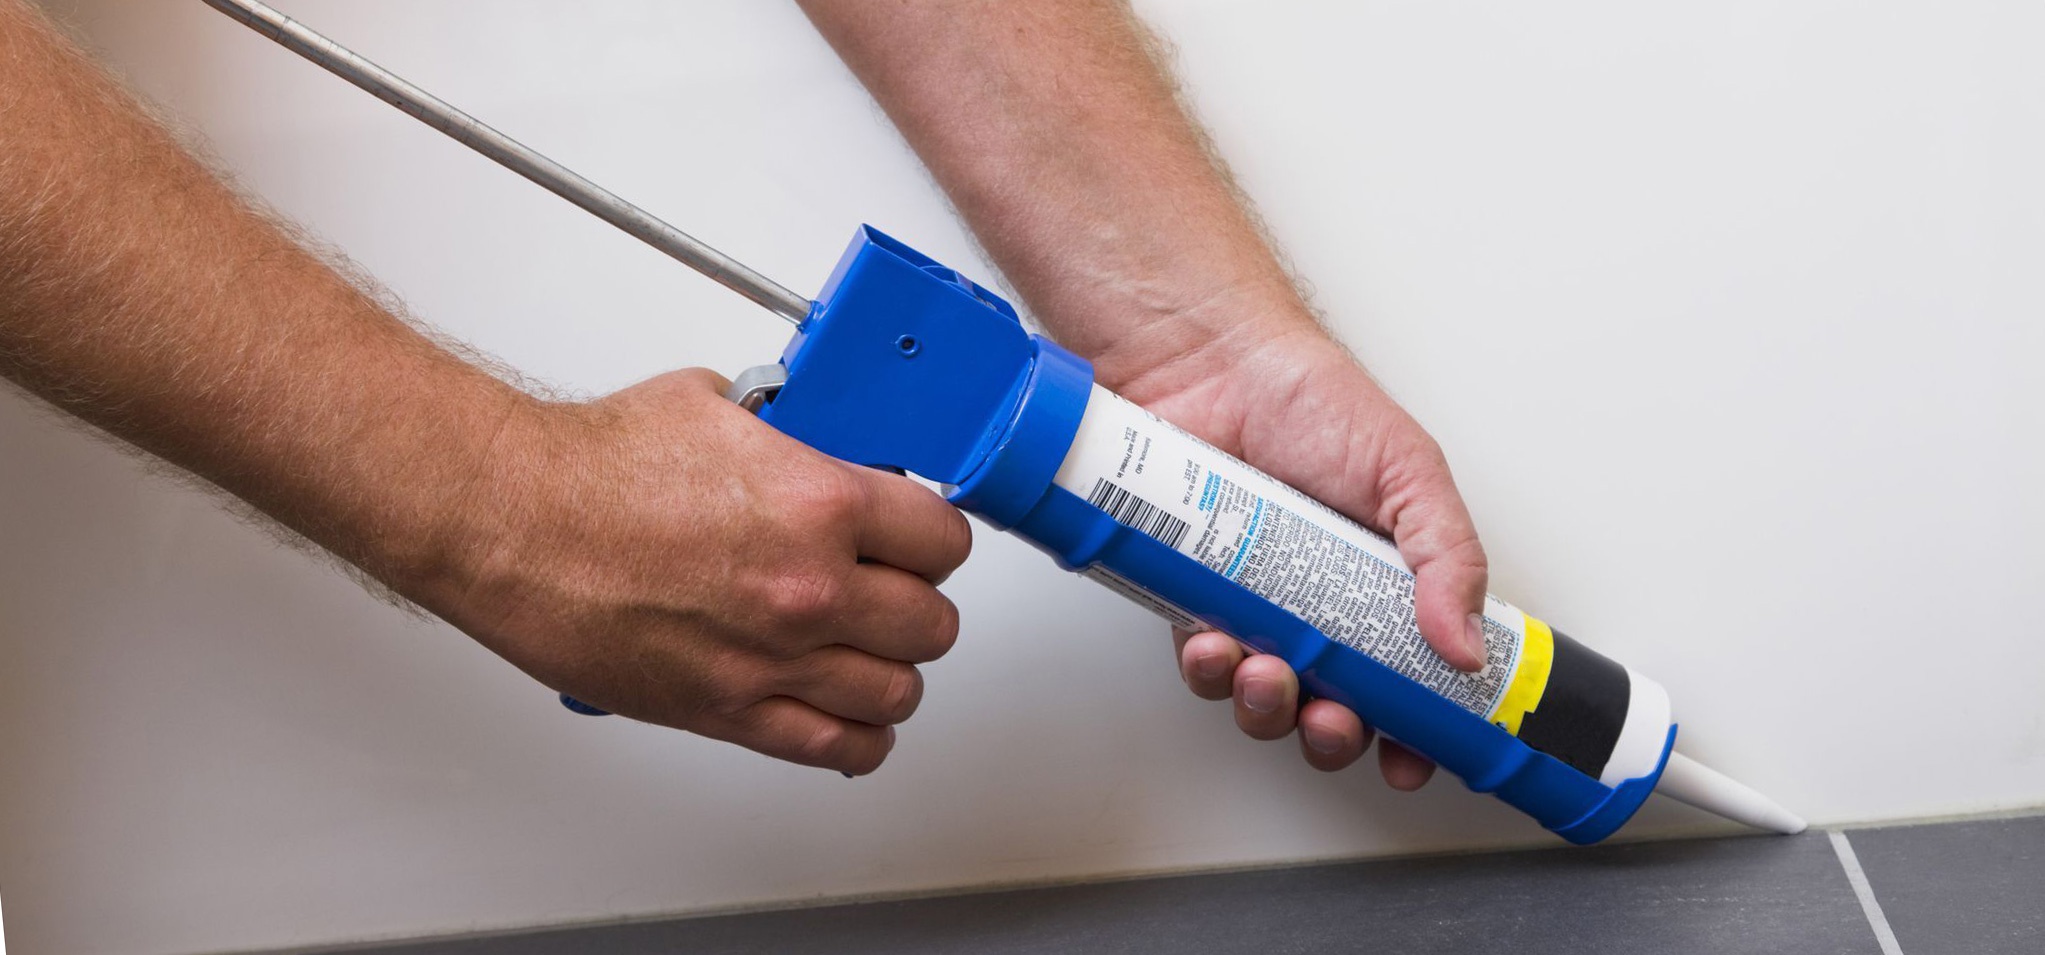 Silicone vs caulk: What's the difference between sealants